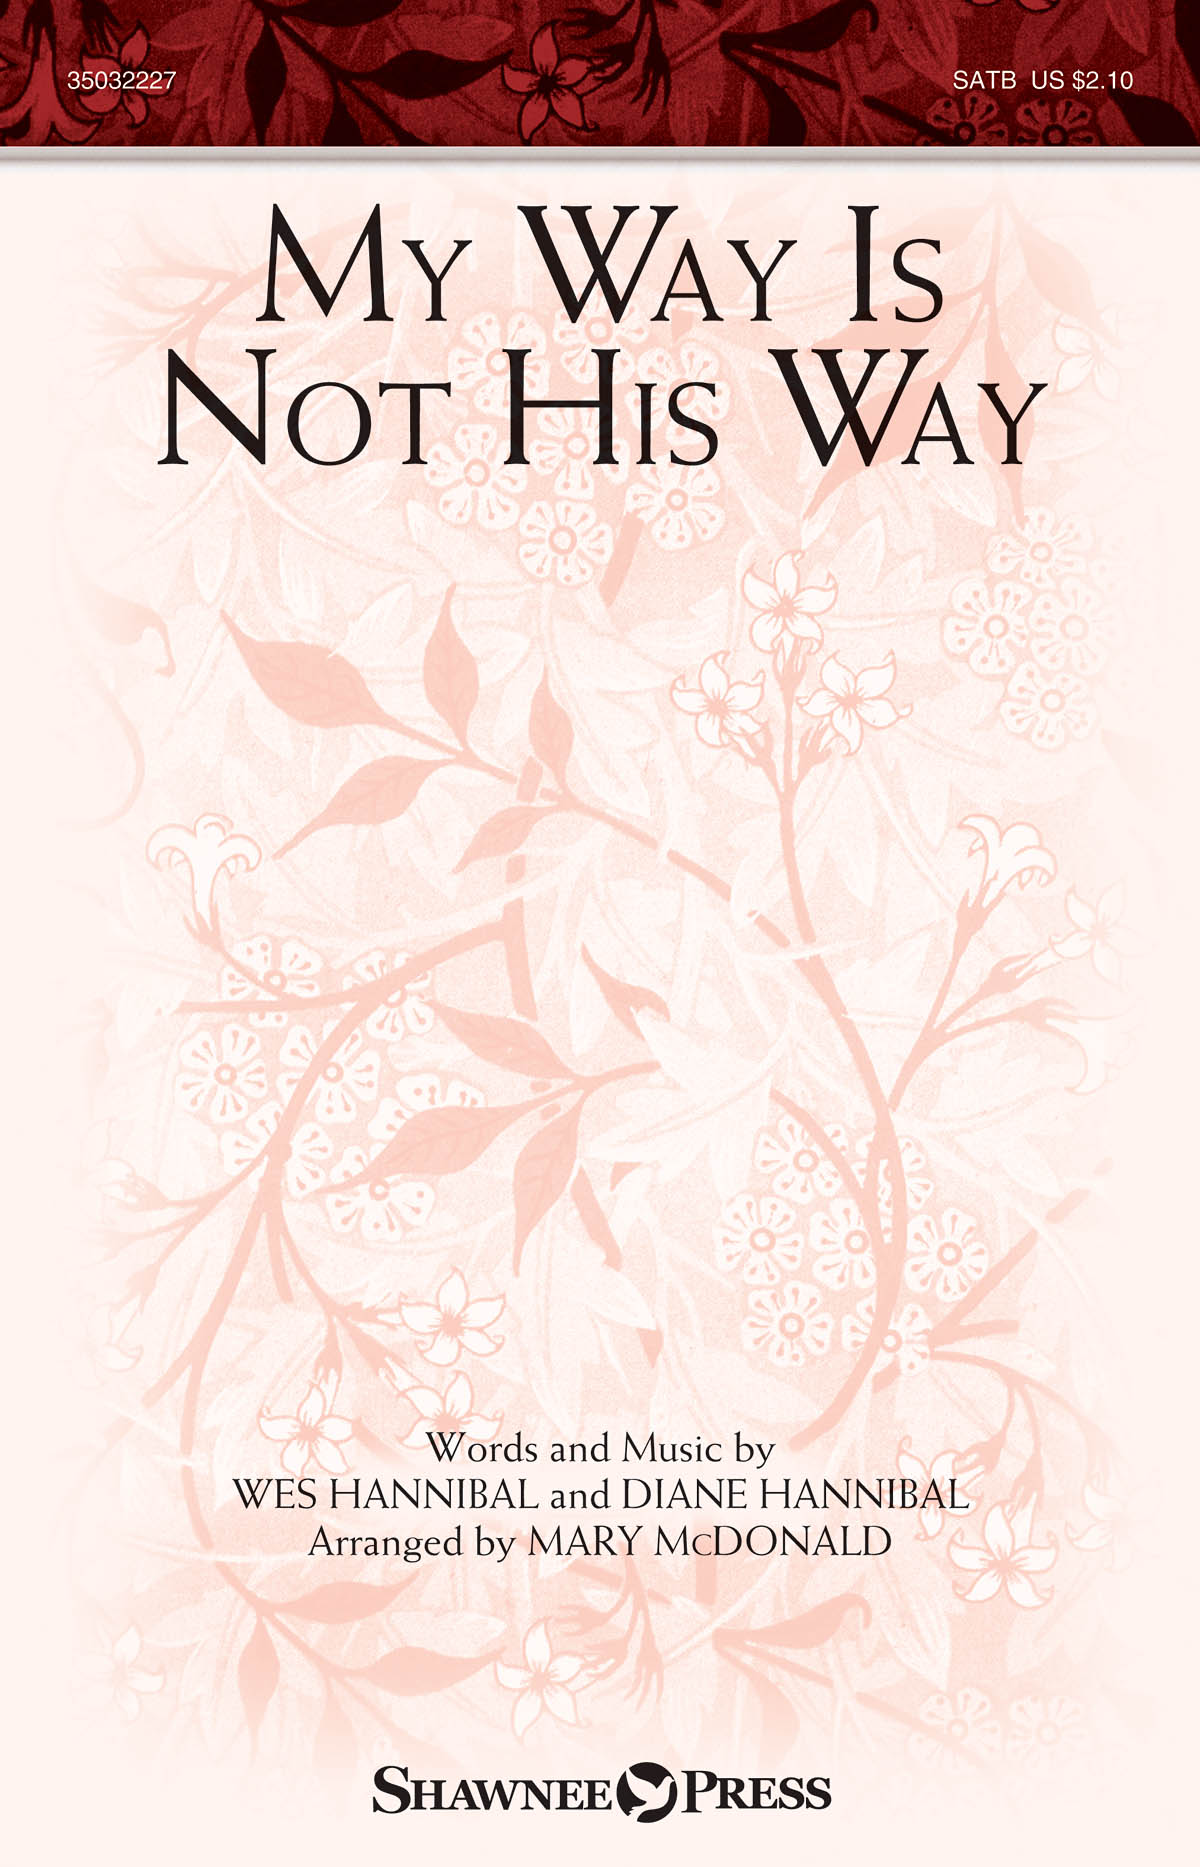 Diane Hannibal Wes Hannibal: My Way Is Not His Way: SATB: Vocal Score